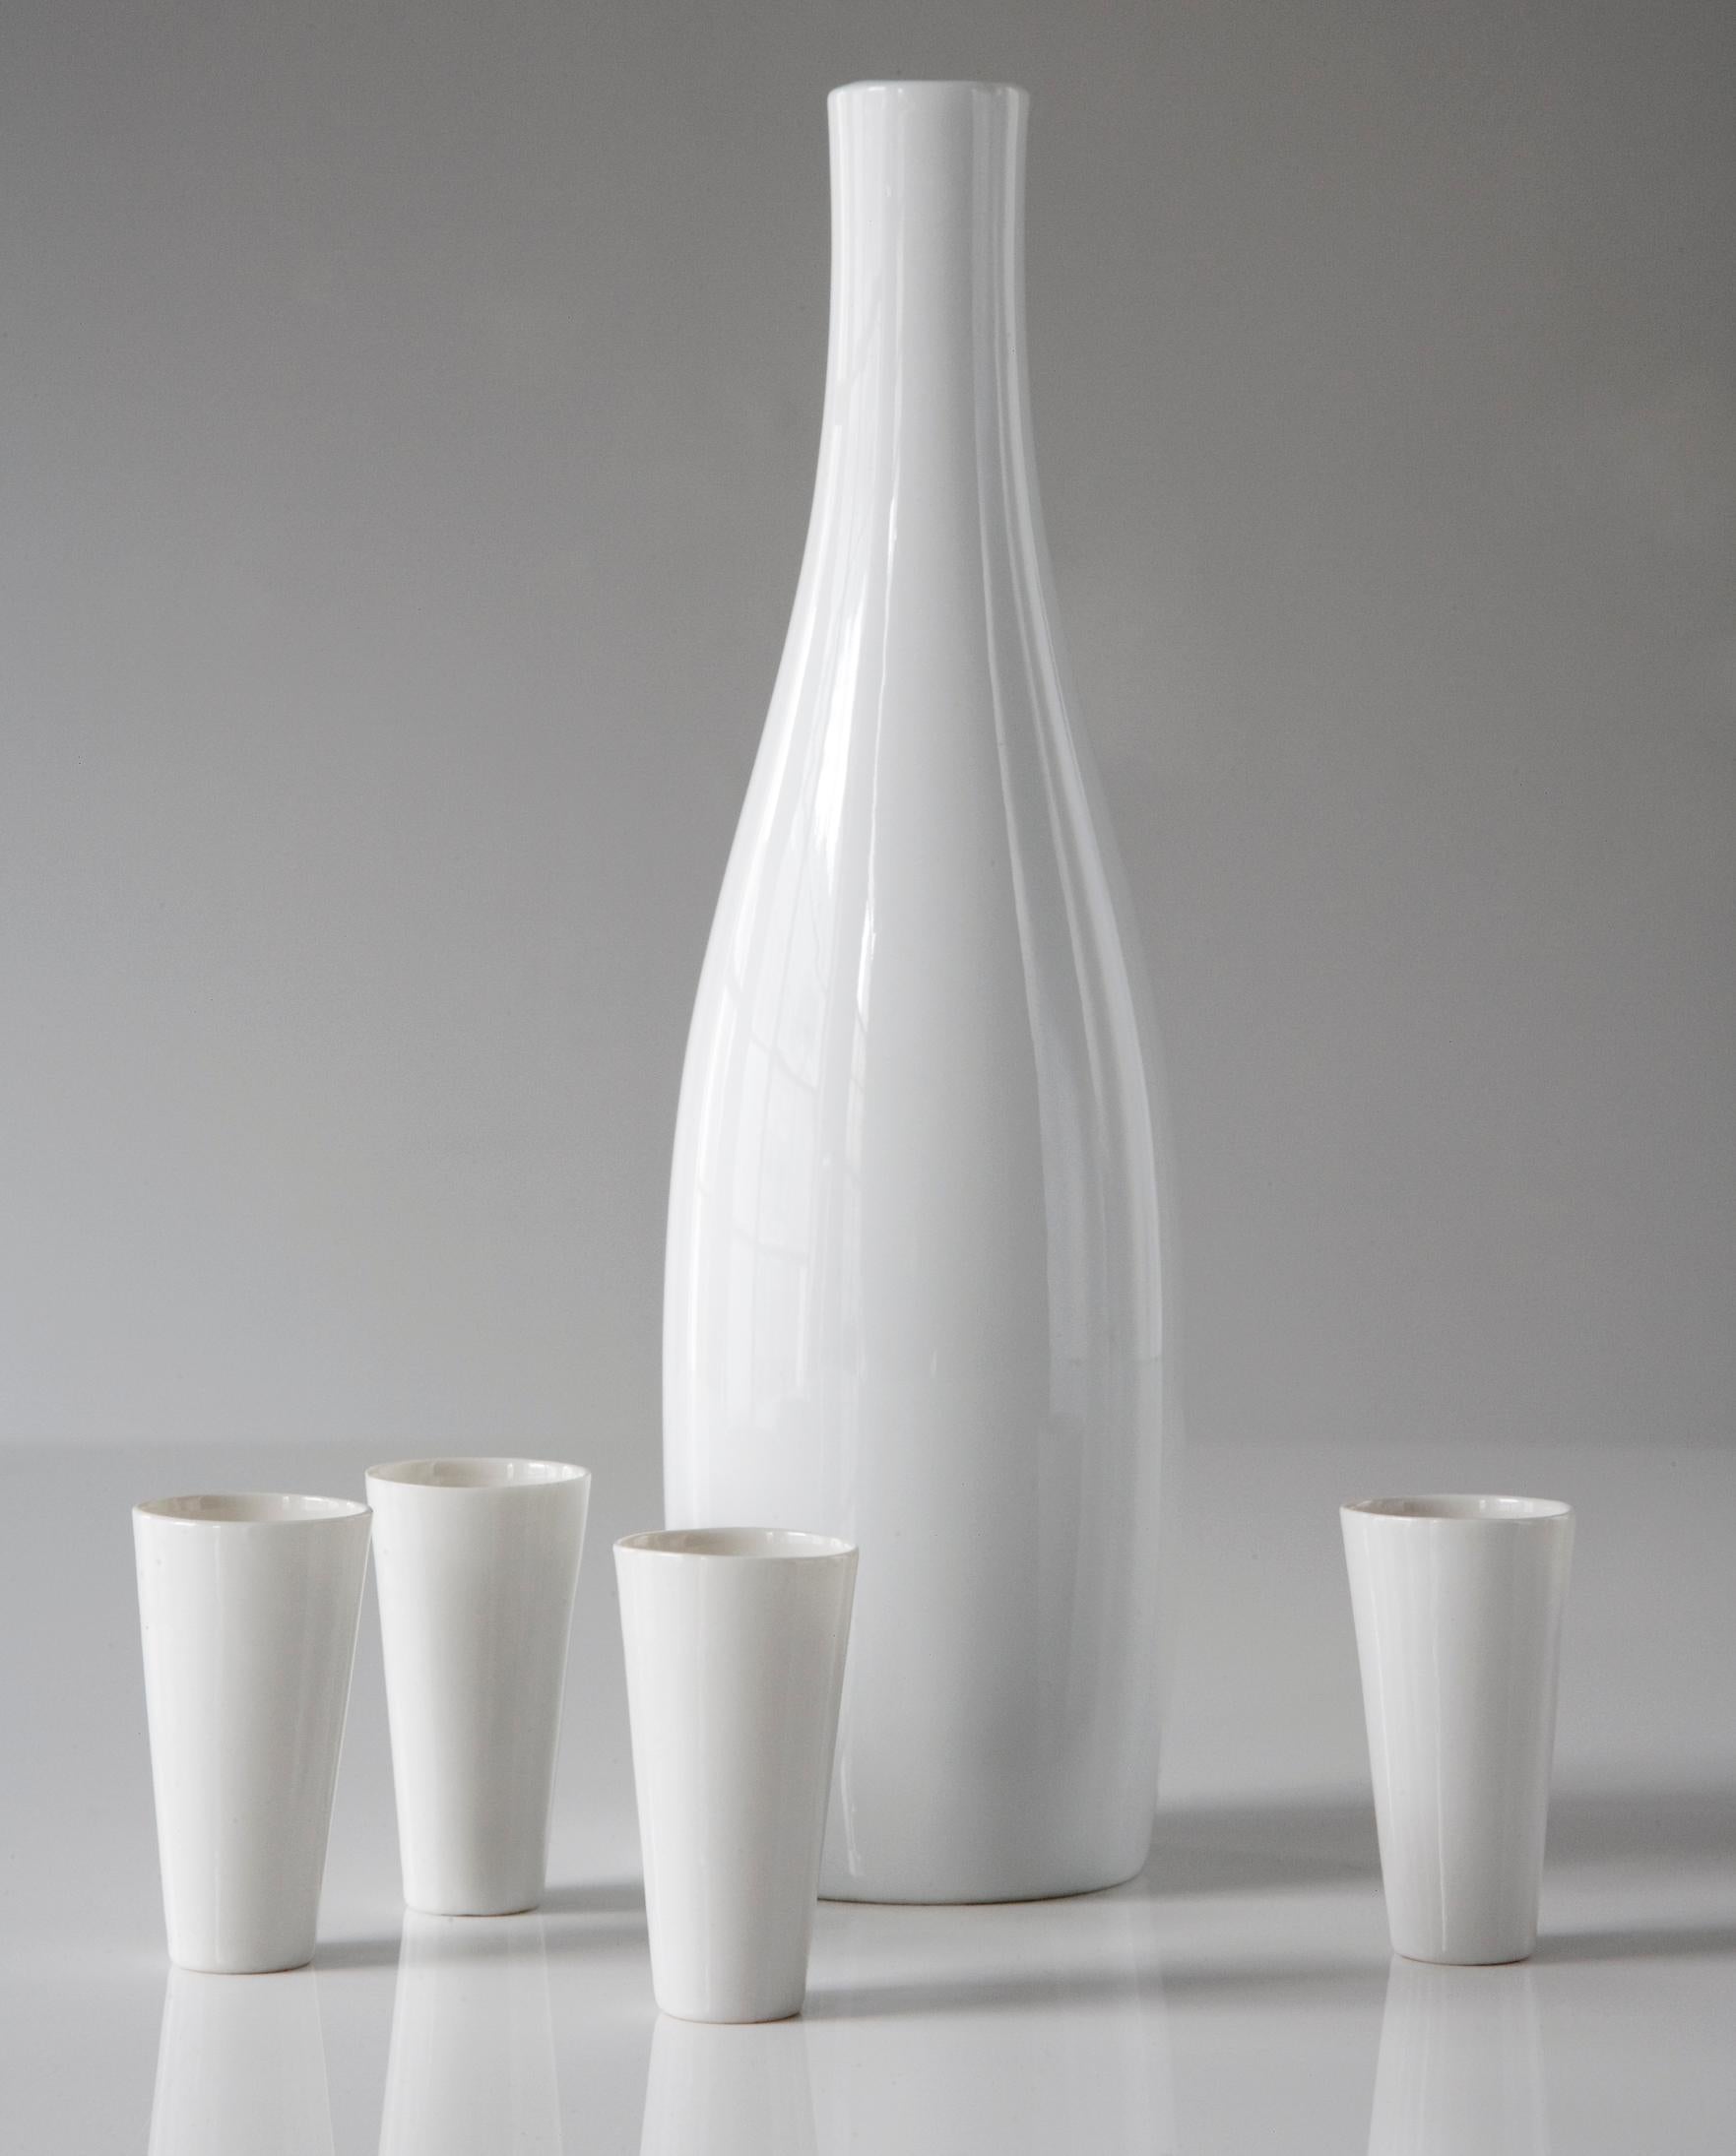 Ceramic sake set with bottle and four small cups. Designed by La Gardo Tackett, USA, 1950s.
   